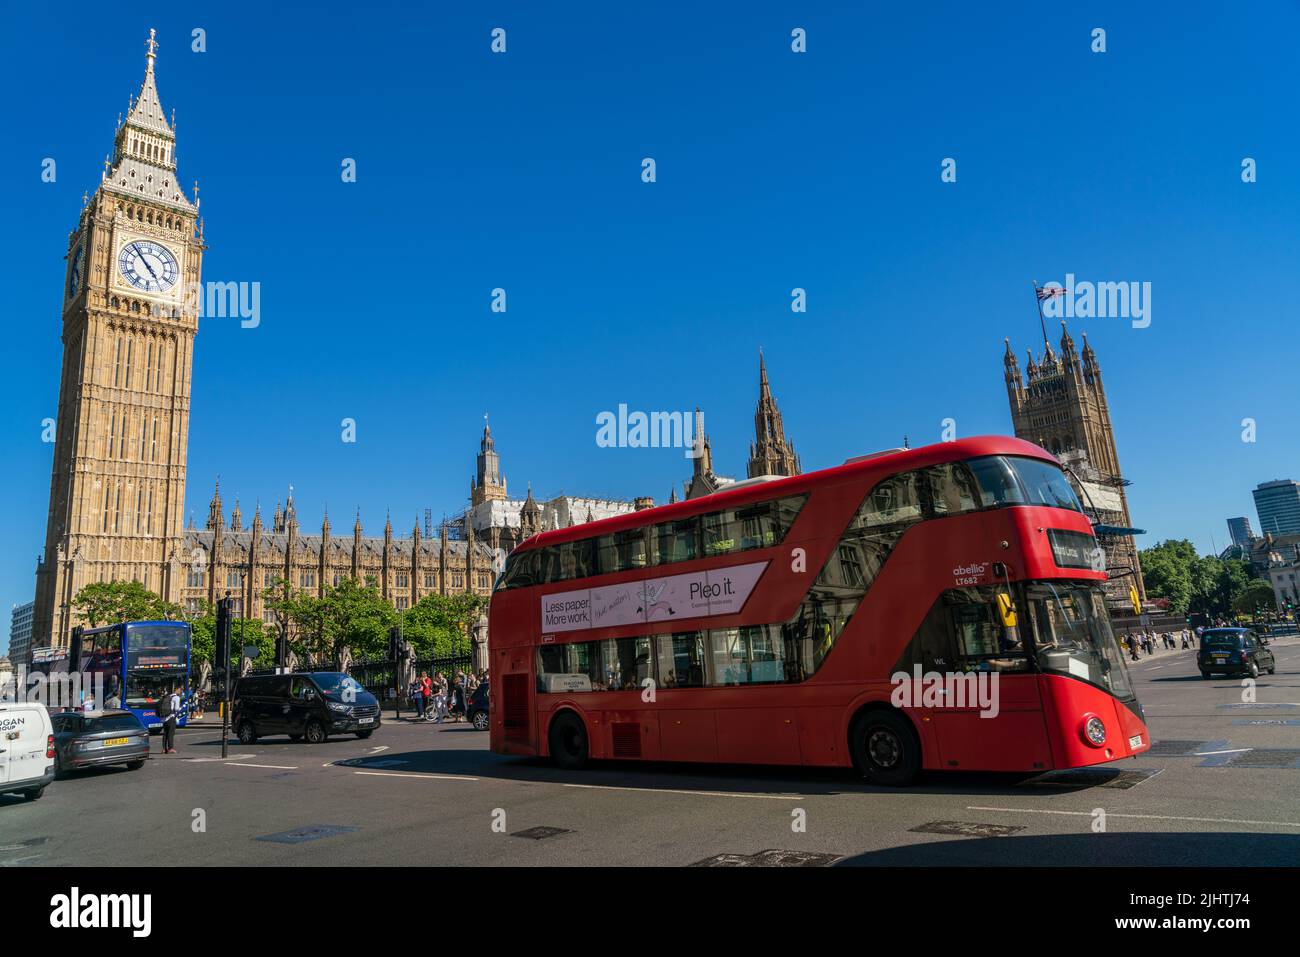 THE HOUSES OF PARLIAMENT, LONDON, ENGLAND, JUNE 22, 2022. Big Ben, The Palace of Westminster and a traditional Red London Bus, Parliament Sqaure, Lond Stock Photo